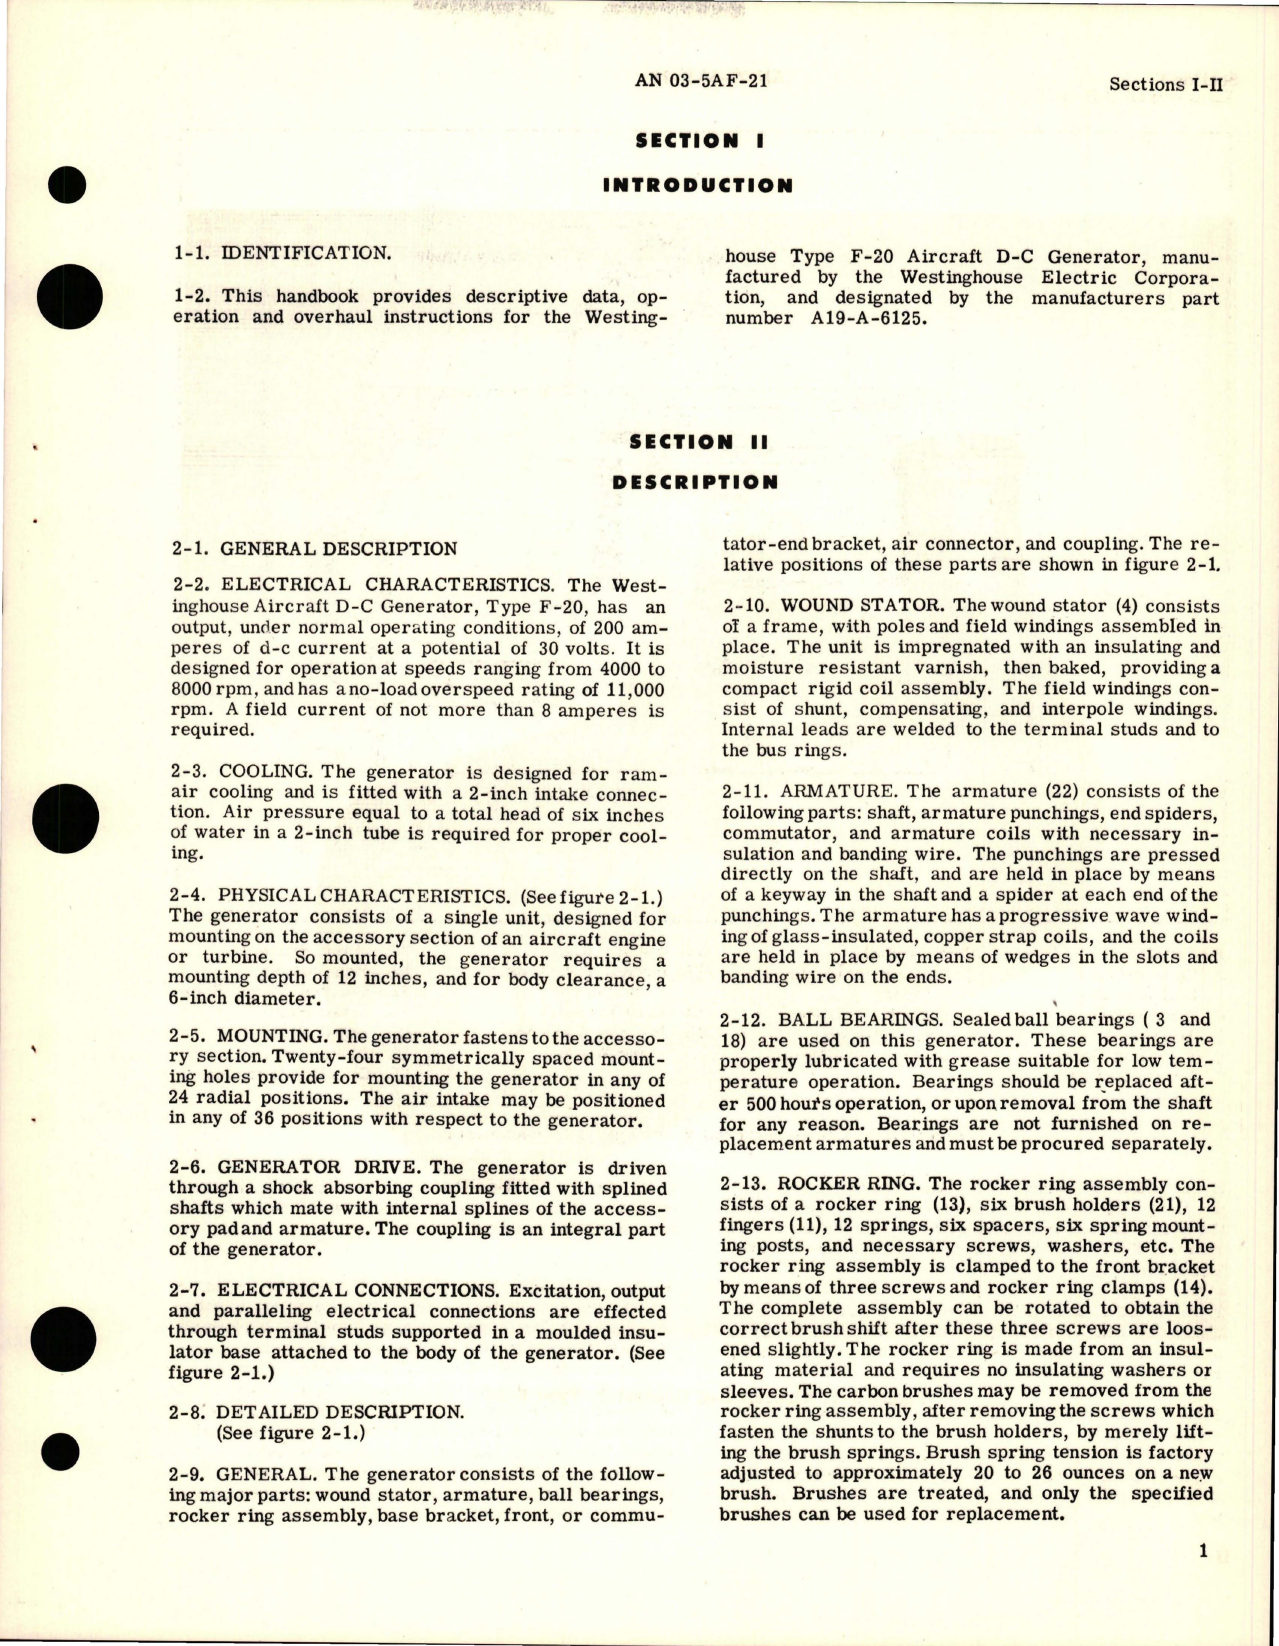 Sample page 5 from AirCorps Library document: Operation, Service and Overhaul Instructions with Parts Catalog for DC Generator Type F-20 